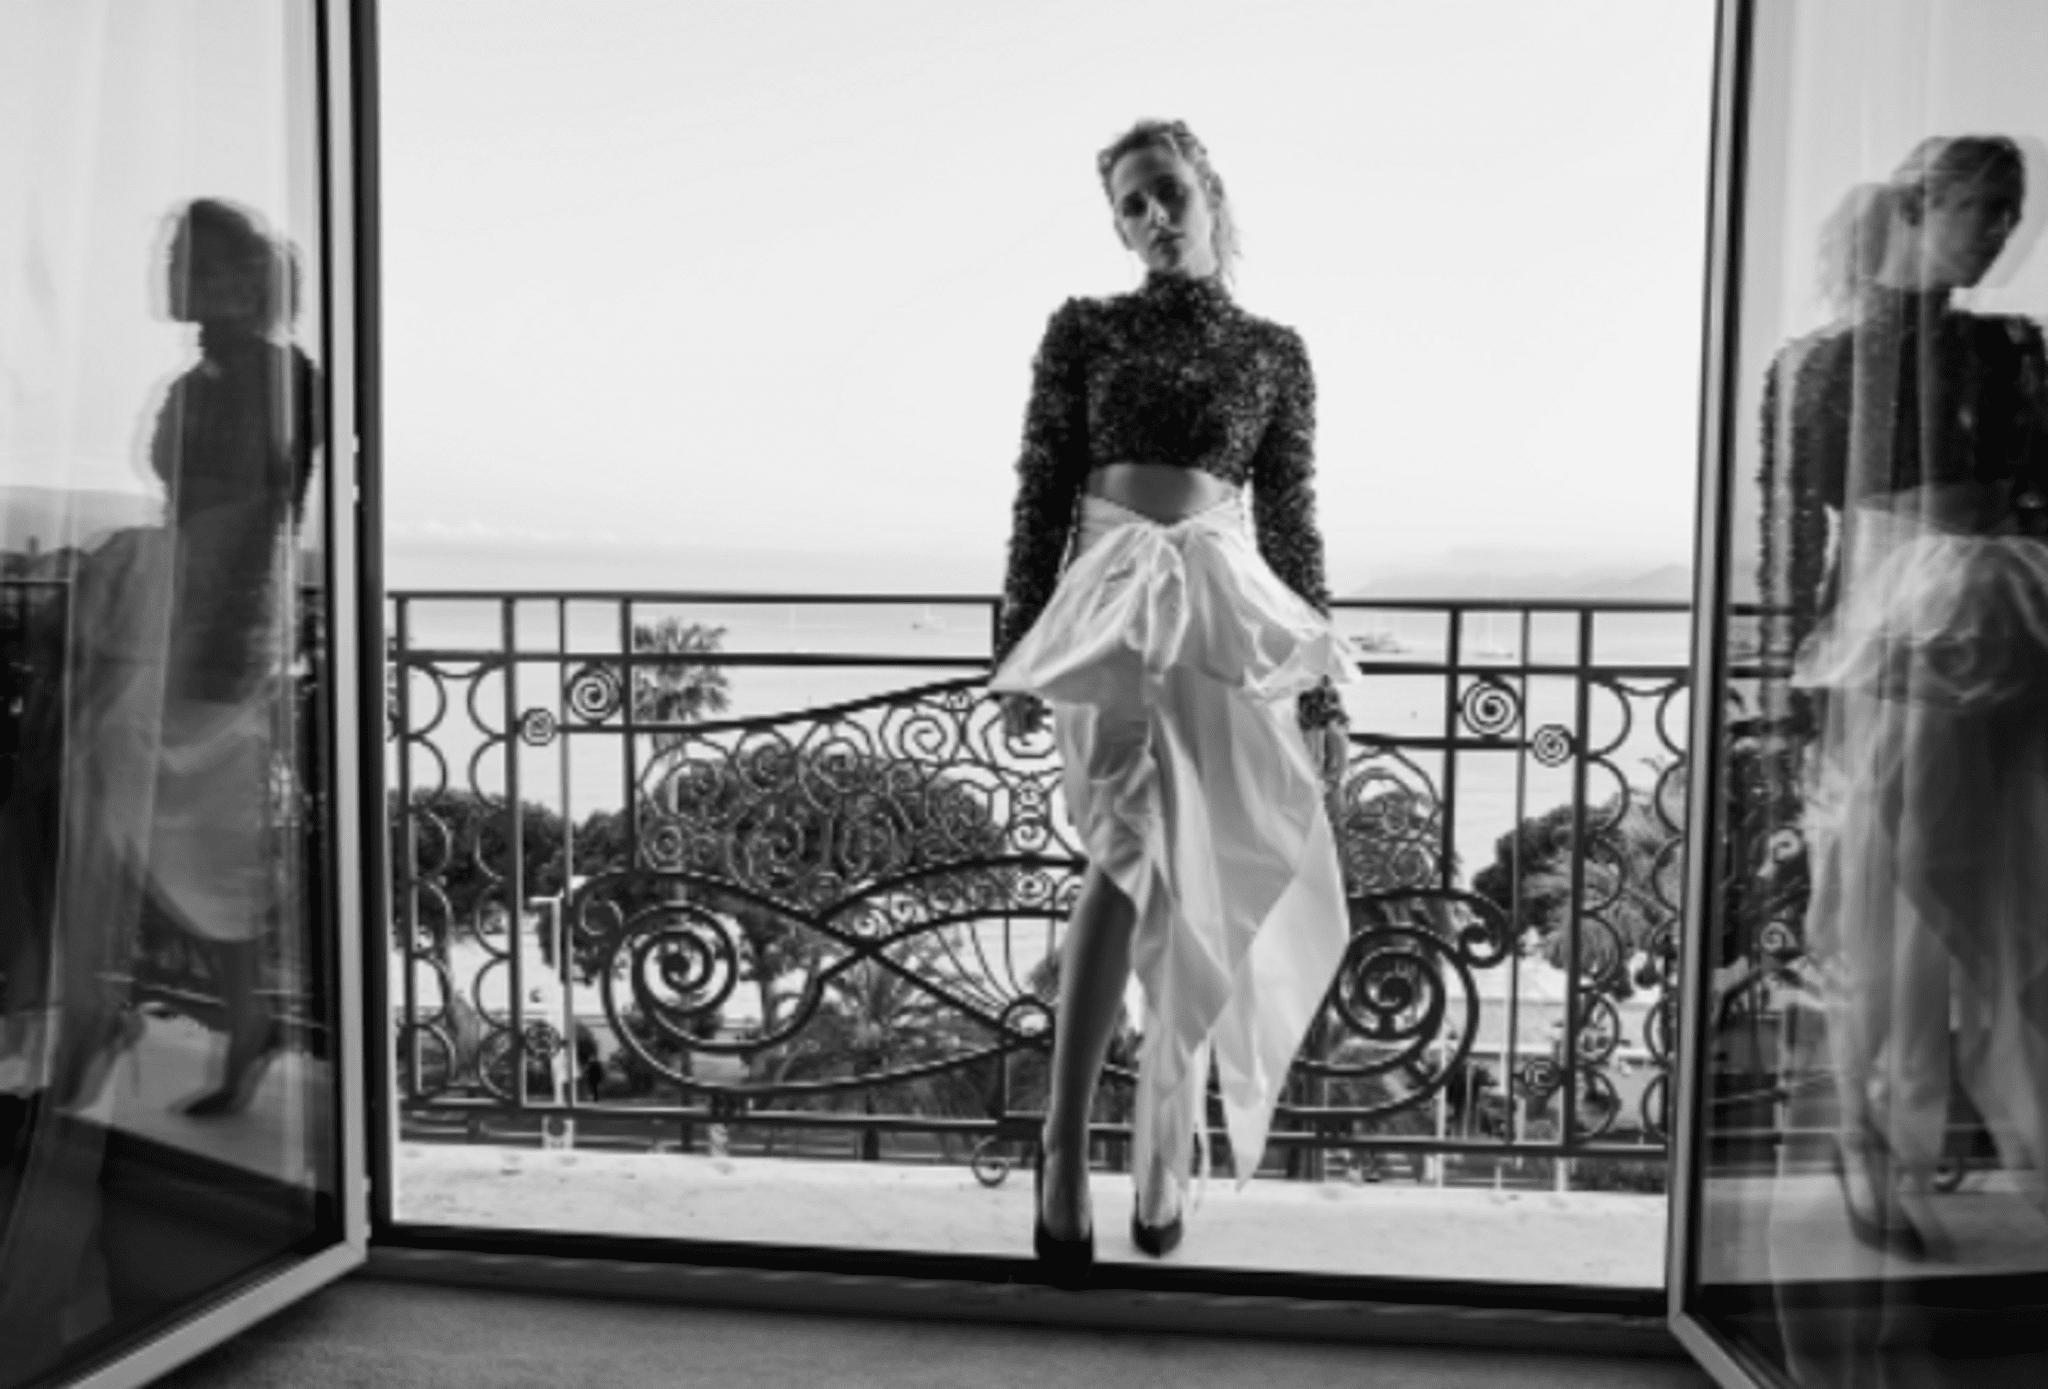 ”kristen-stewart-in-a-spectacular-image-from-chanel-presented-a-horror-film-at-cannes”